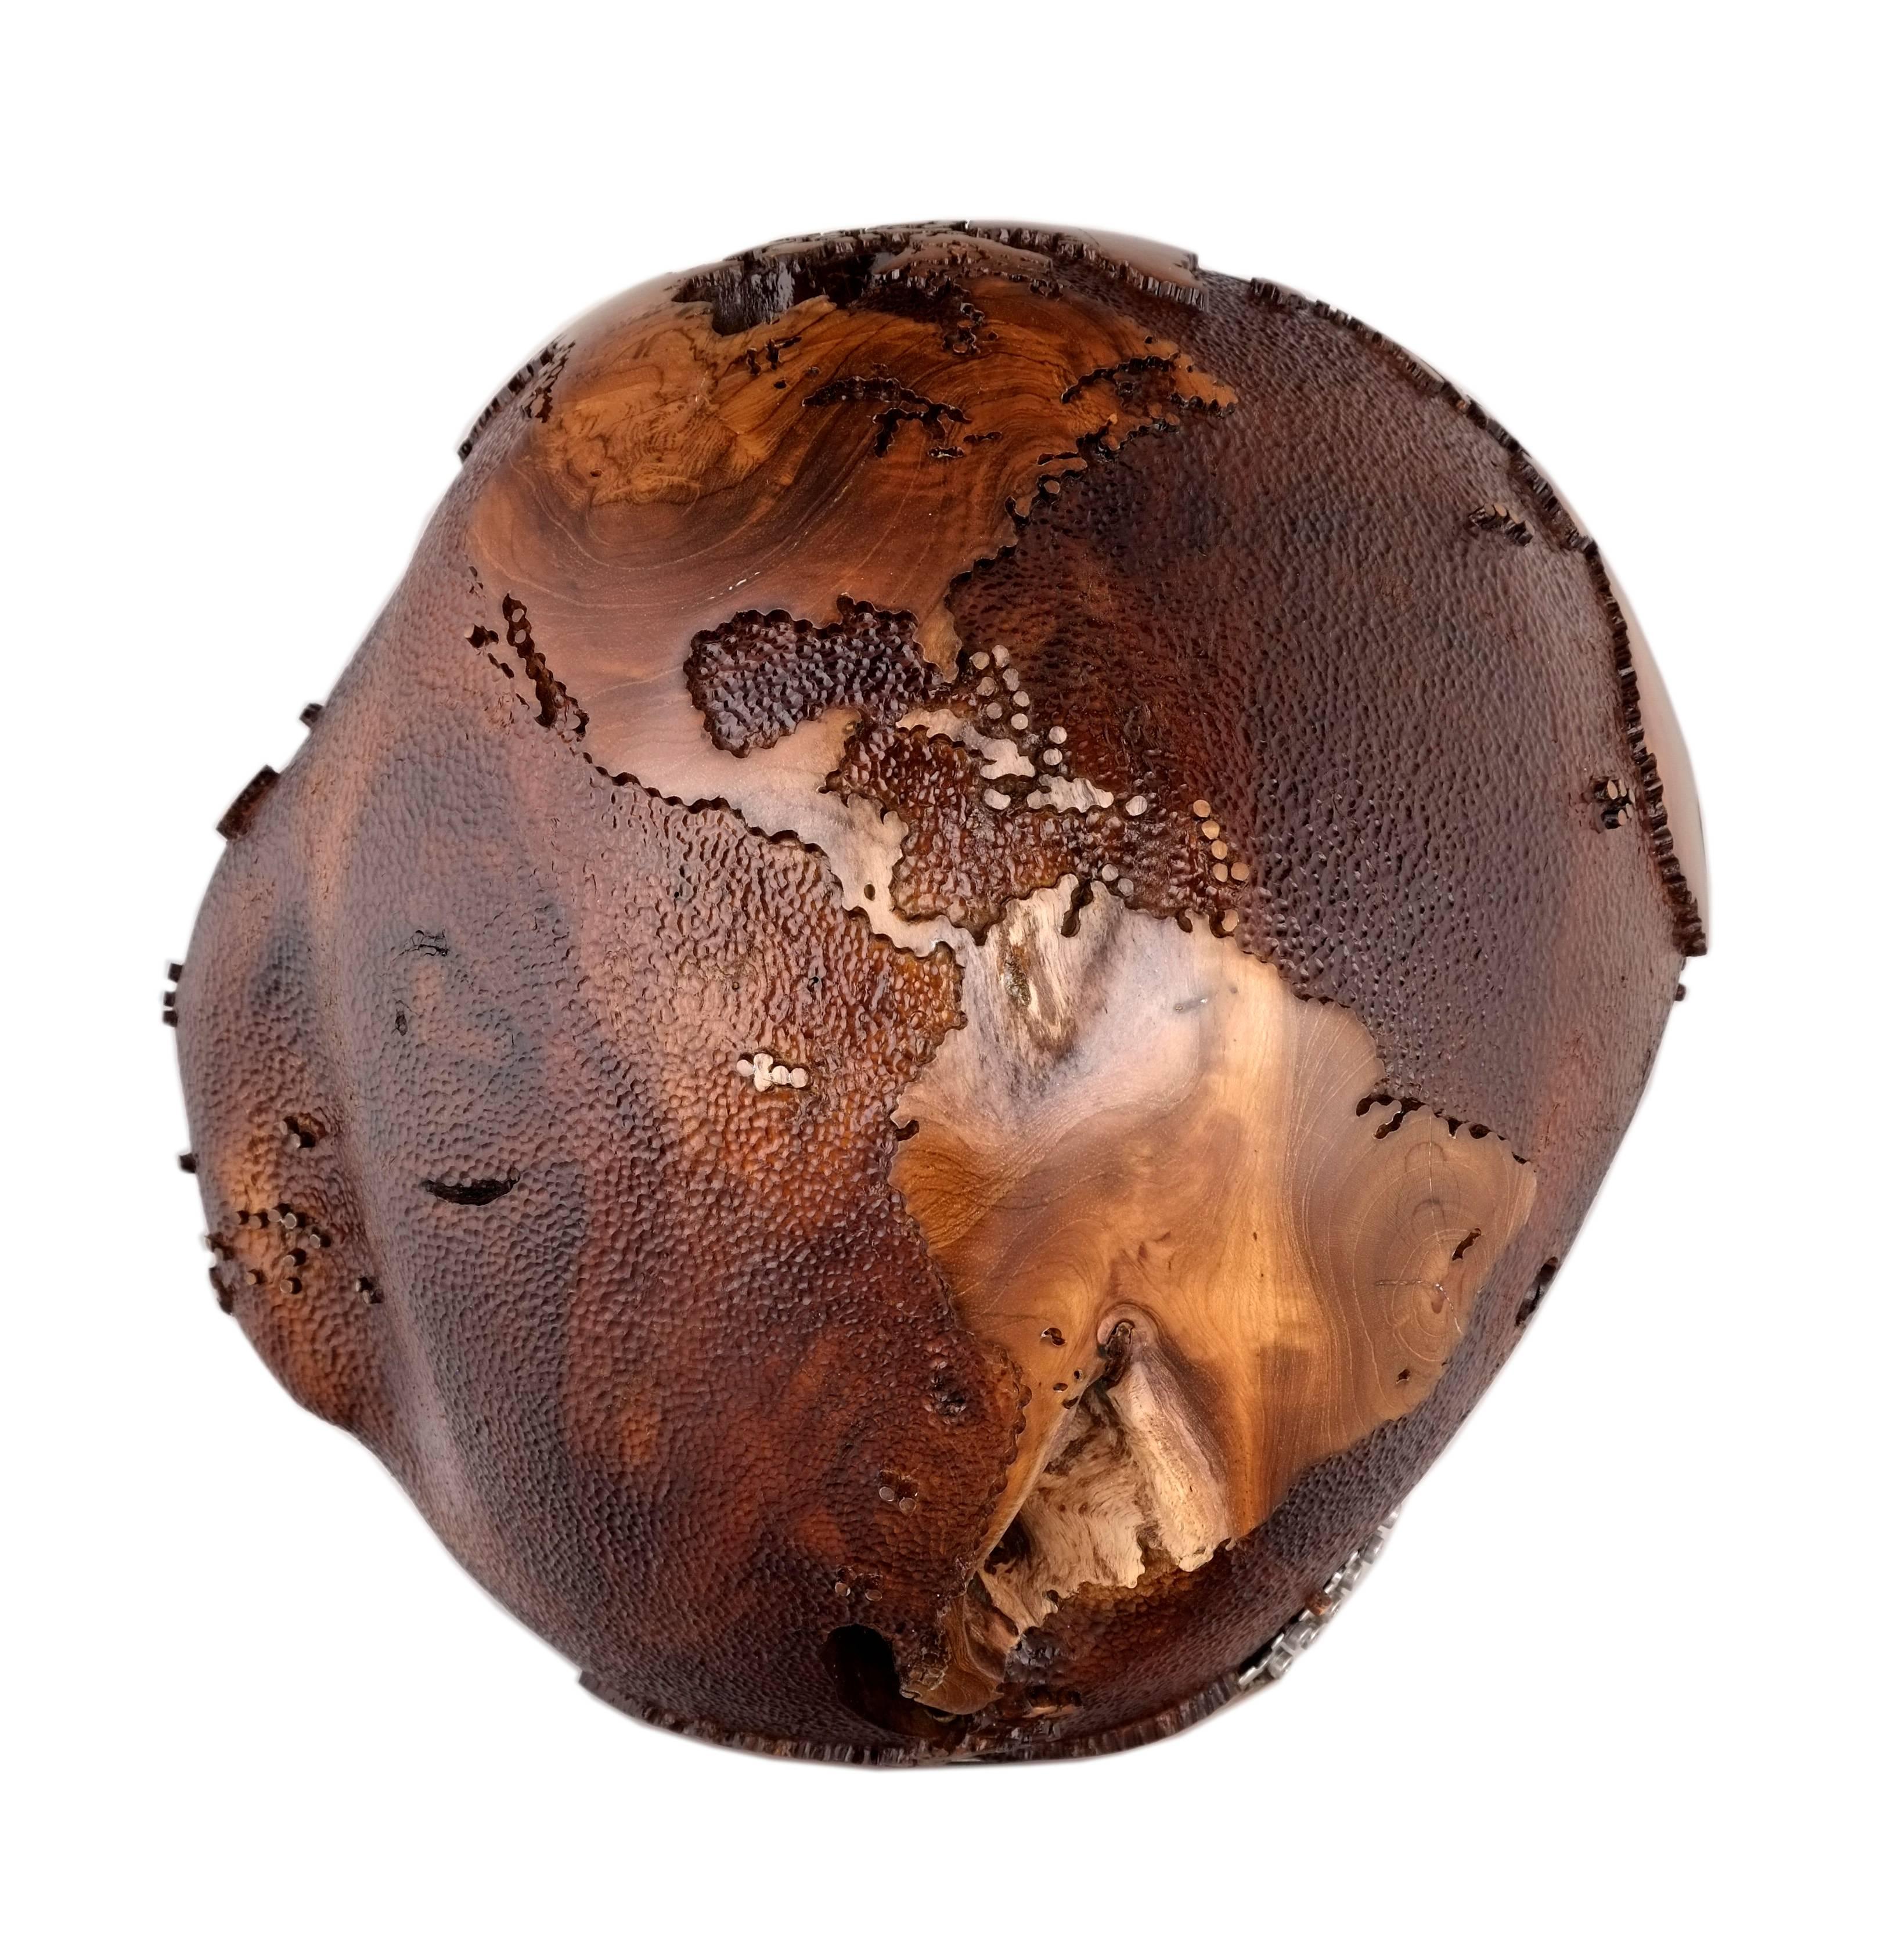 Don't let average describe your life, be extraordinary.

Extraordinary wooden globe made of teak root and 91 pieces of stainless steel bolts on a stainless steel plate layered between Africa and Antarctica continents following the teak root's